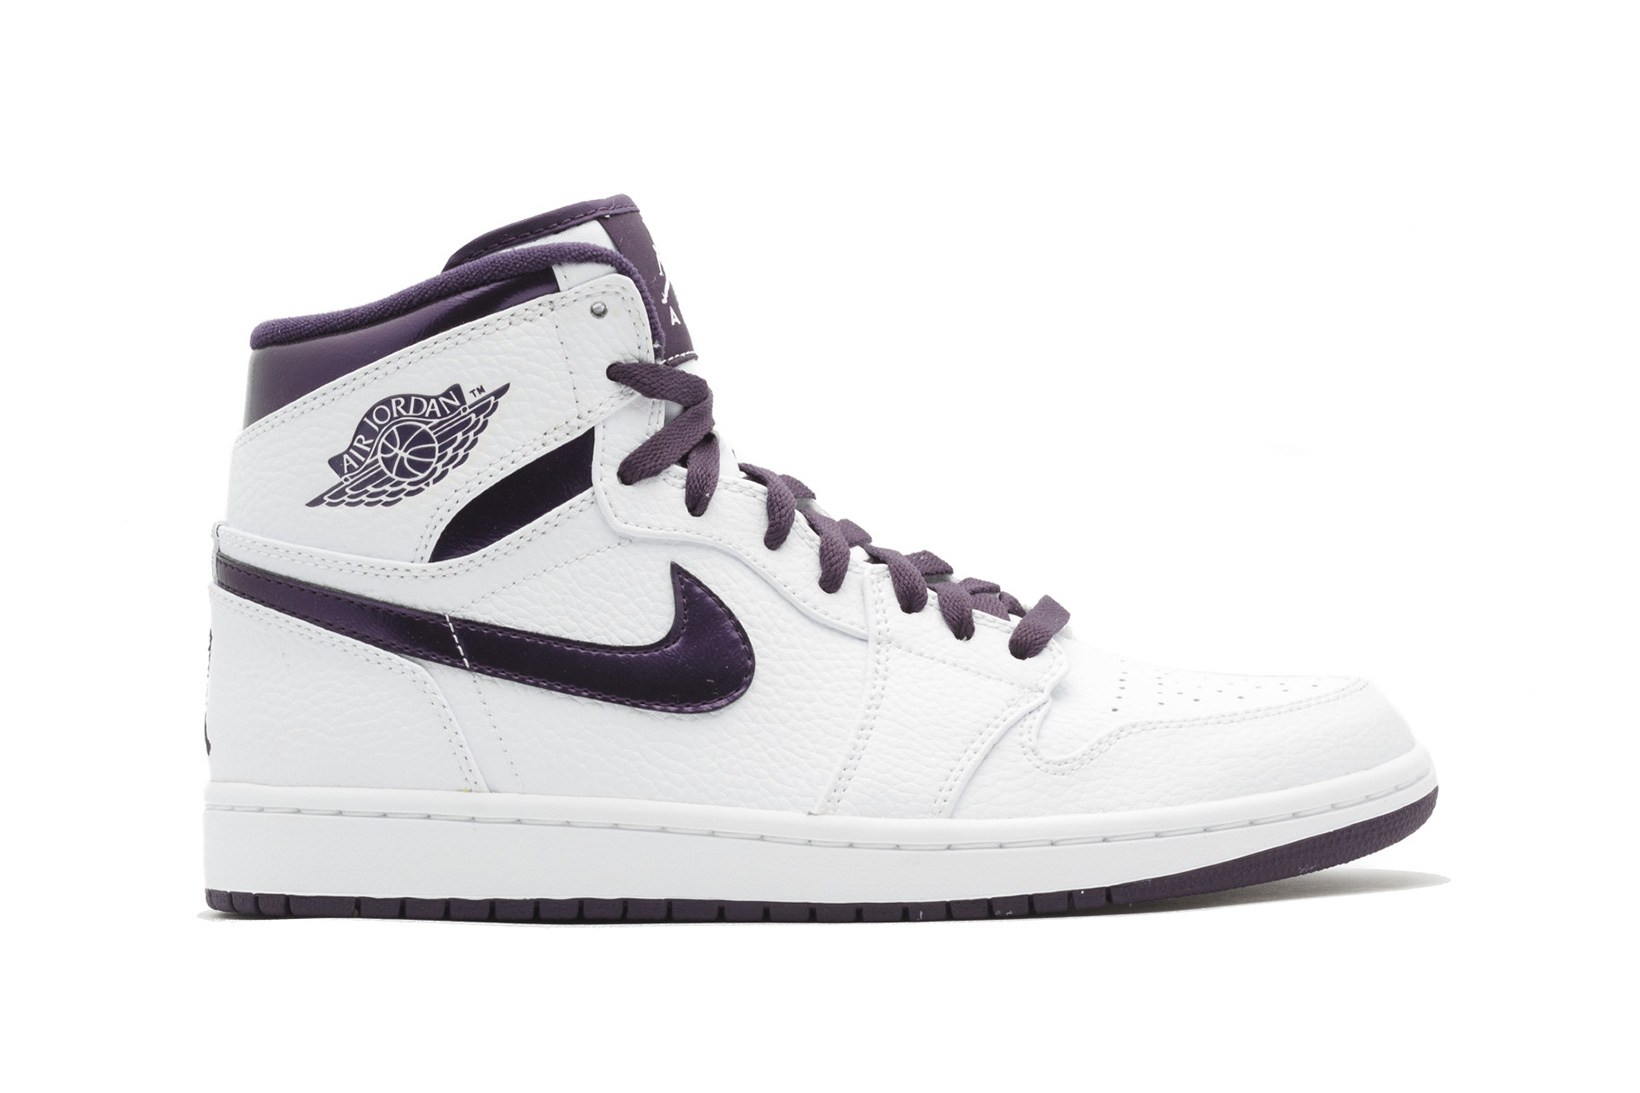 the purple and white jordans